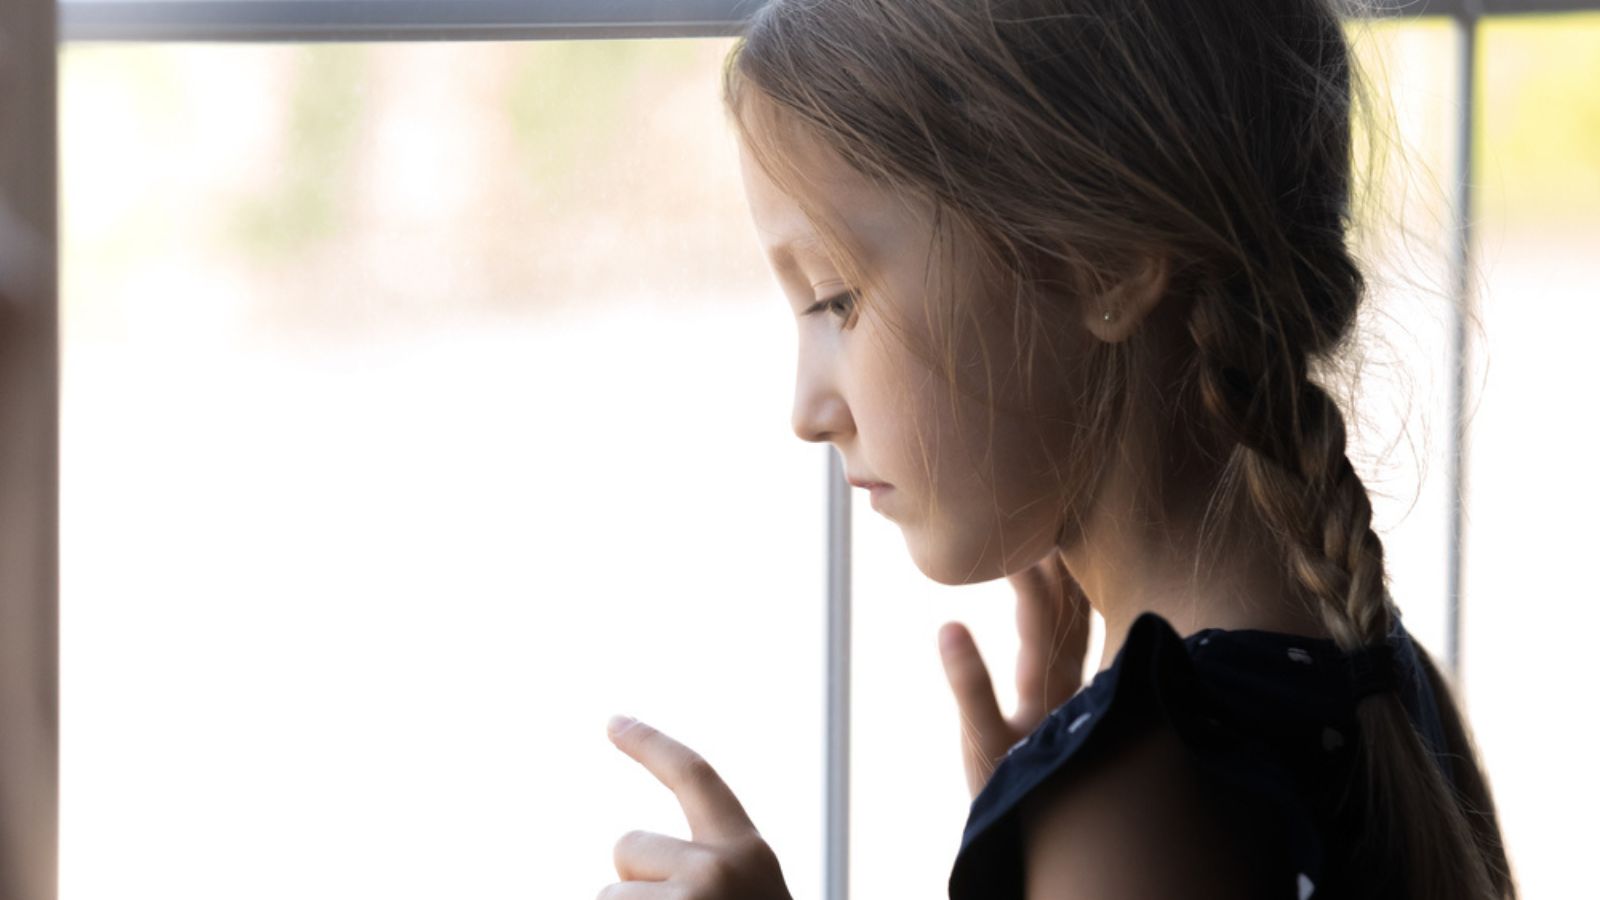 Sad little girl looking out window